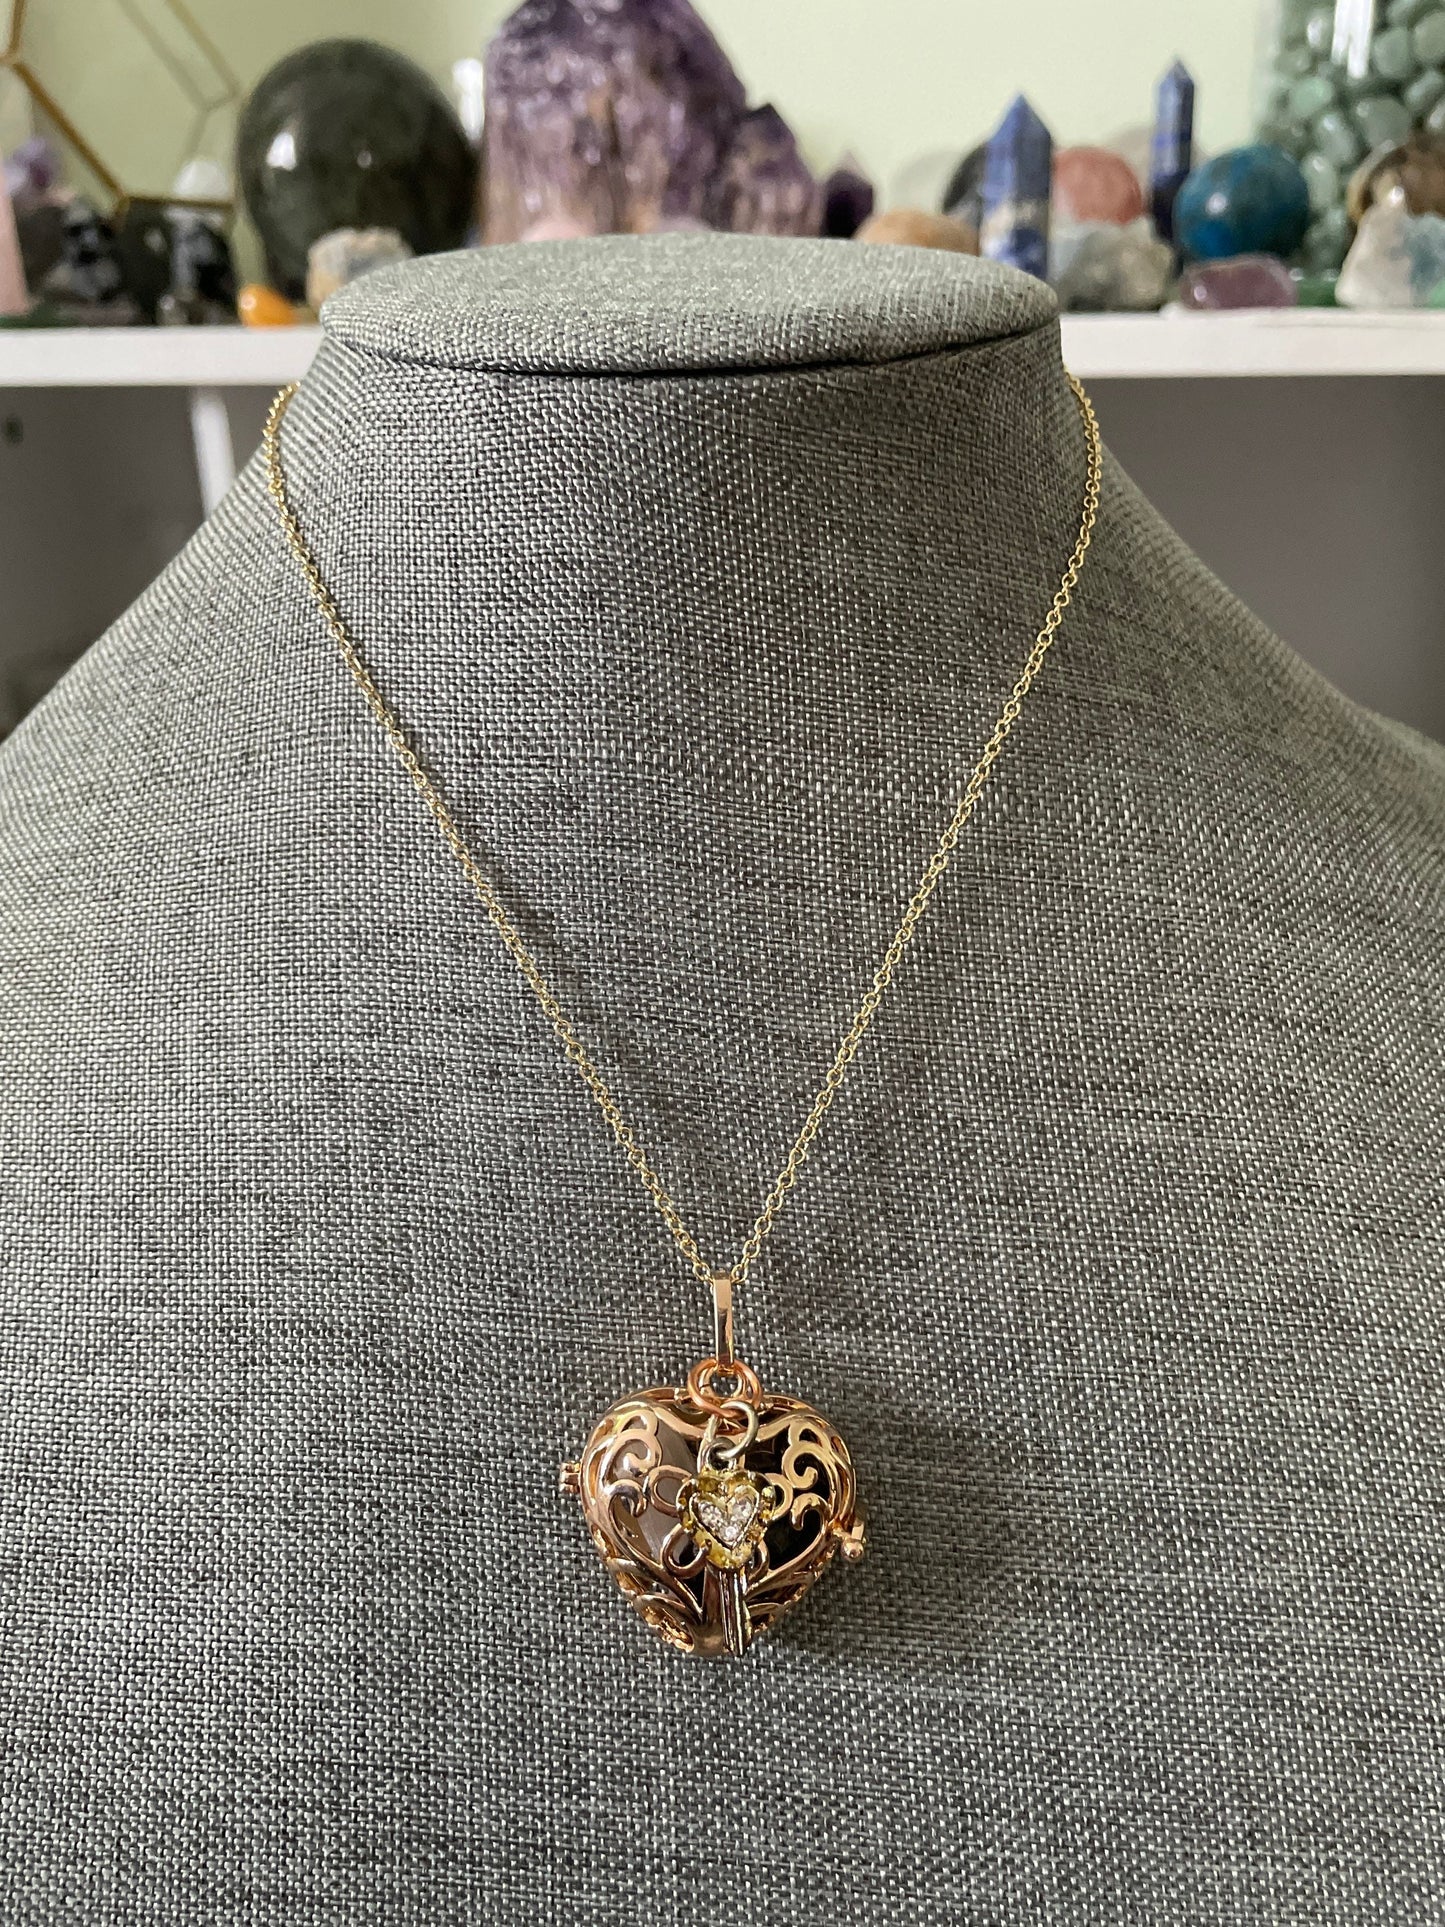 Gold locket filled with crystals on 16+” gold chain